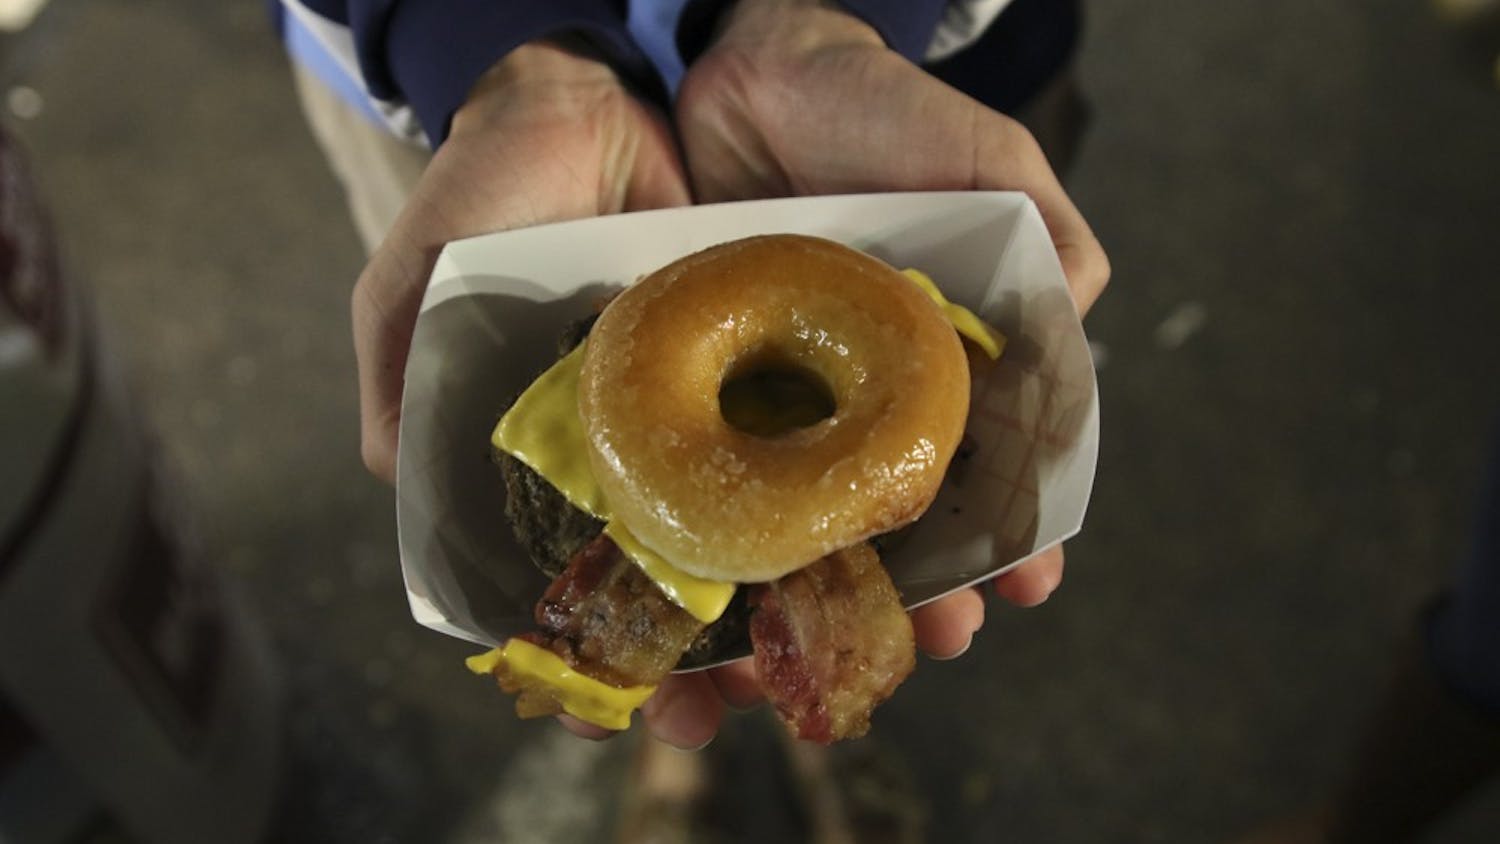 Krispy Kreme burgers are one of many unique foods one can find at the N.C. State Fair.